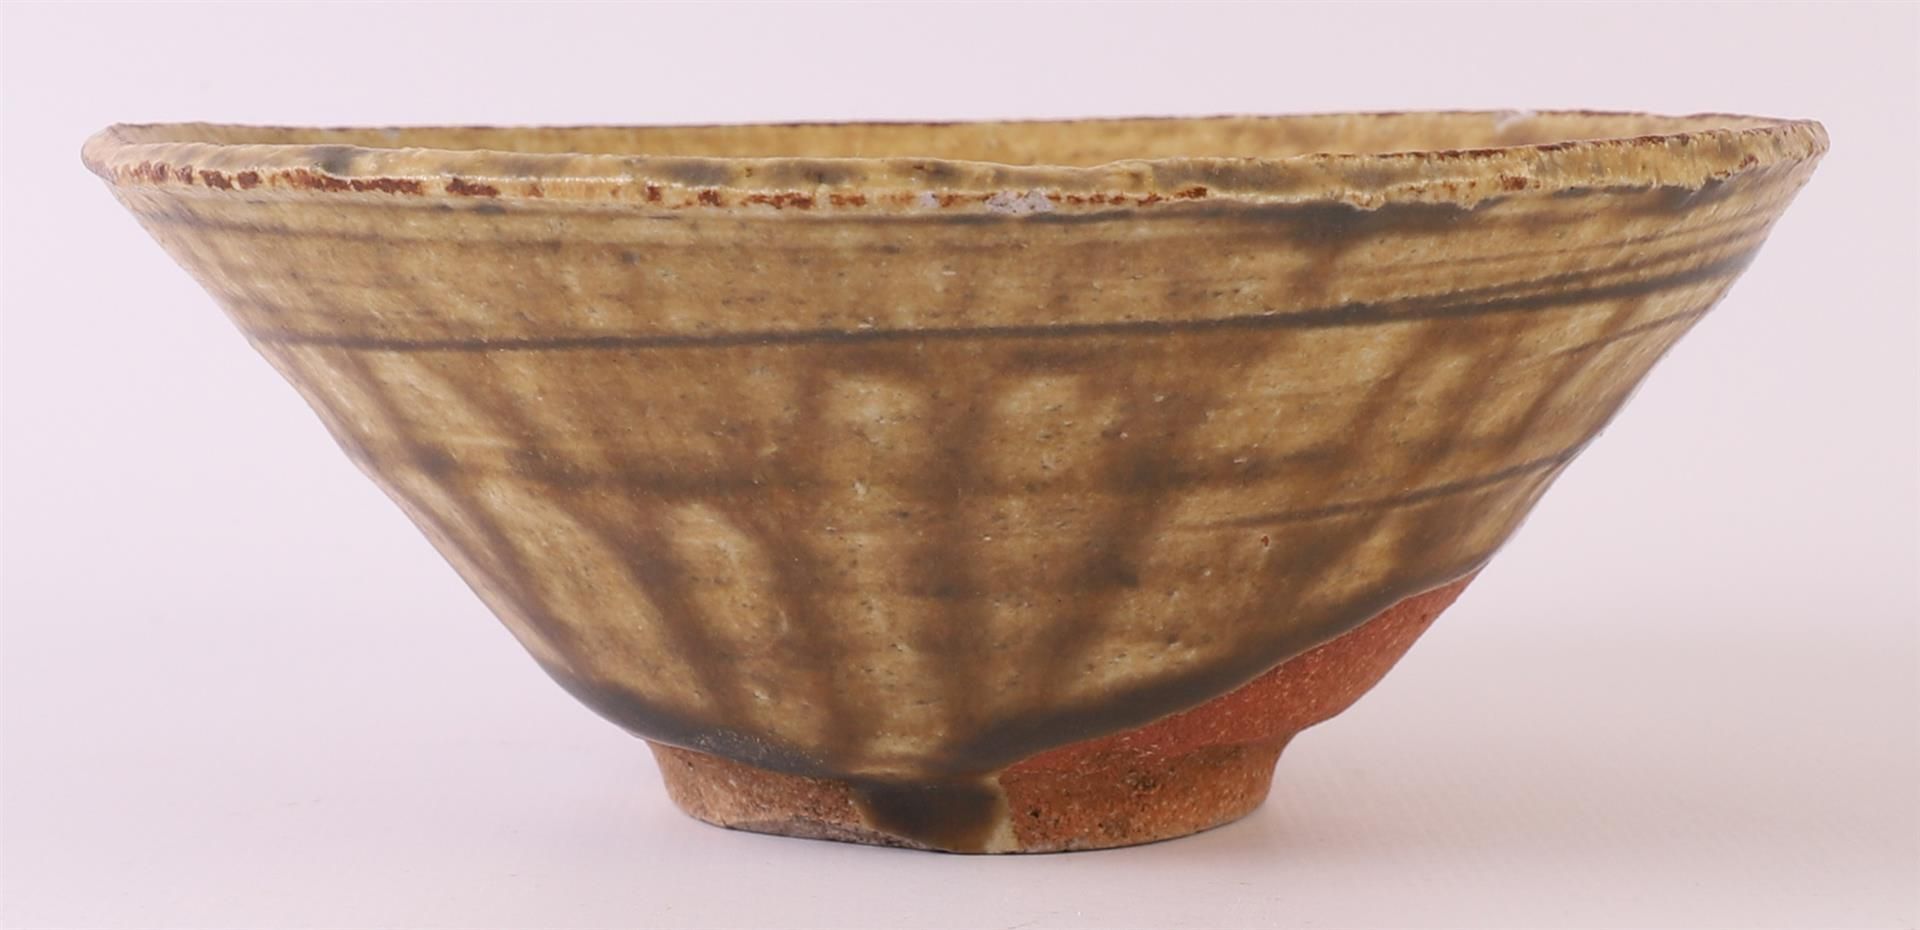 A brown glazed earthenware conical Temmoku bowl, China, Song dynasty 12th century, h 5 x Ø 13.5 - Image 2 of 8